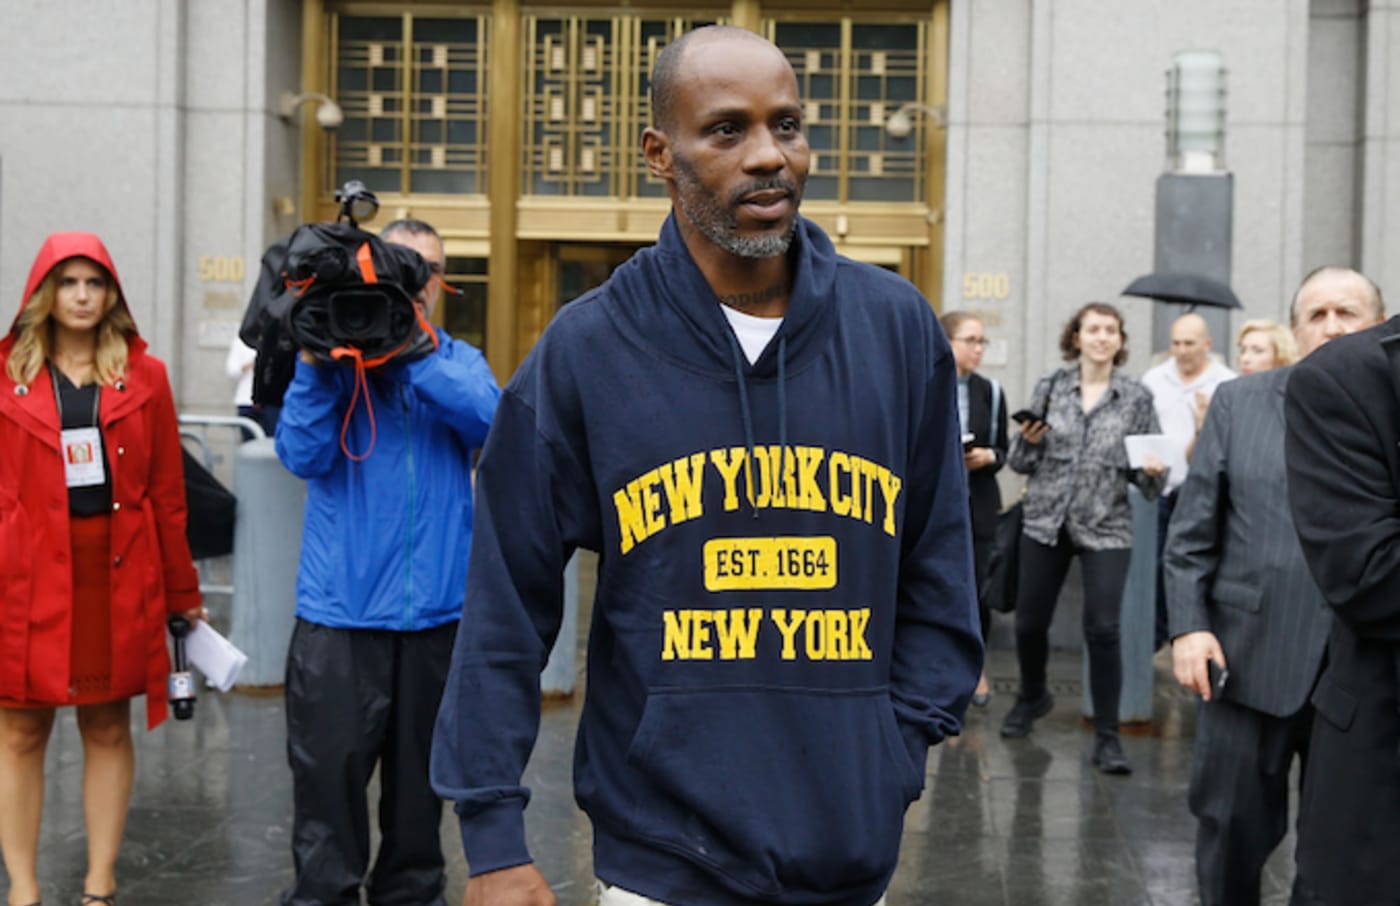 DMX leaving court in New York City after being arraigned of tax fraud charges.